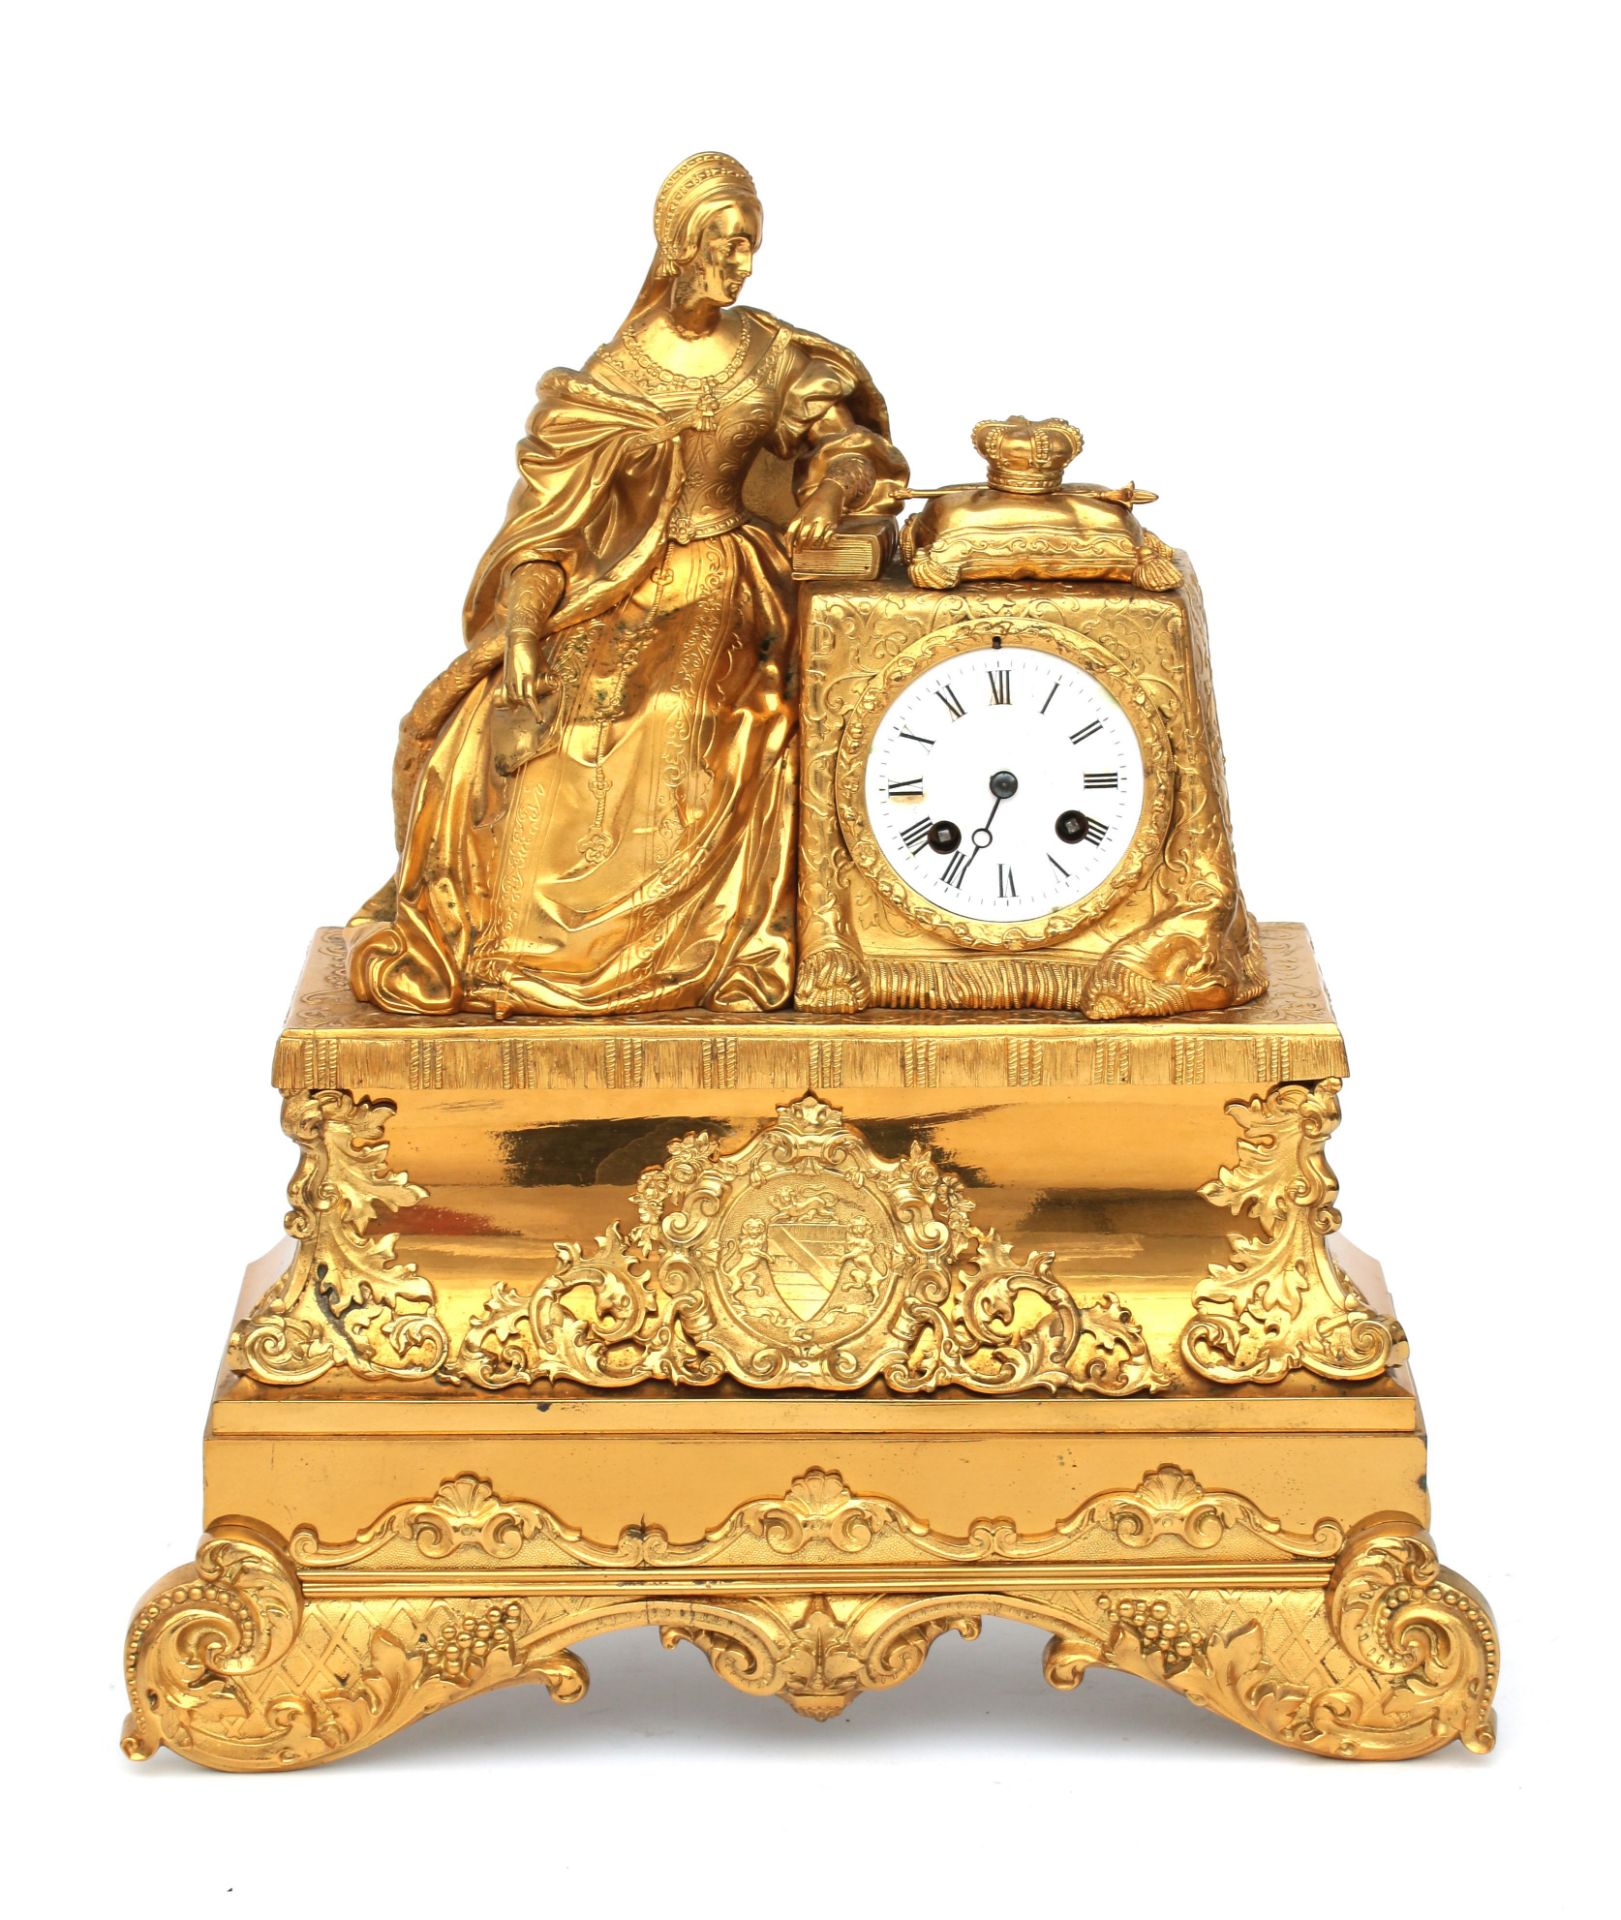 Newly gilt, de case crowned with a lady seated with regalia (crown damaged), de dial face with